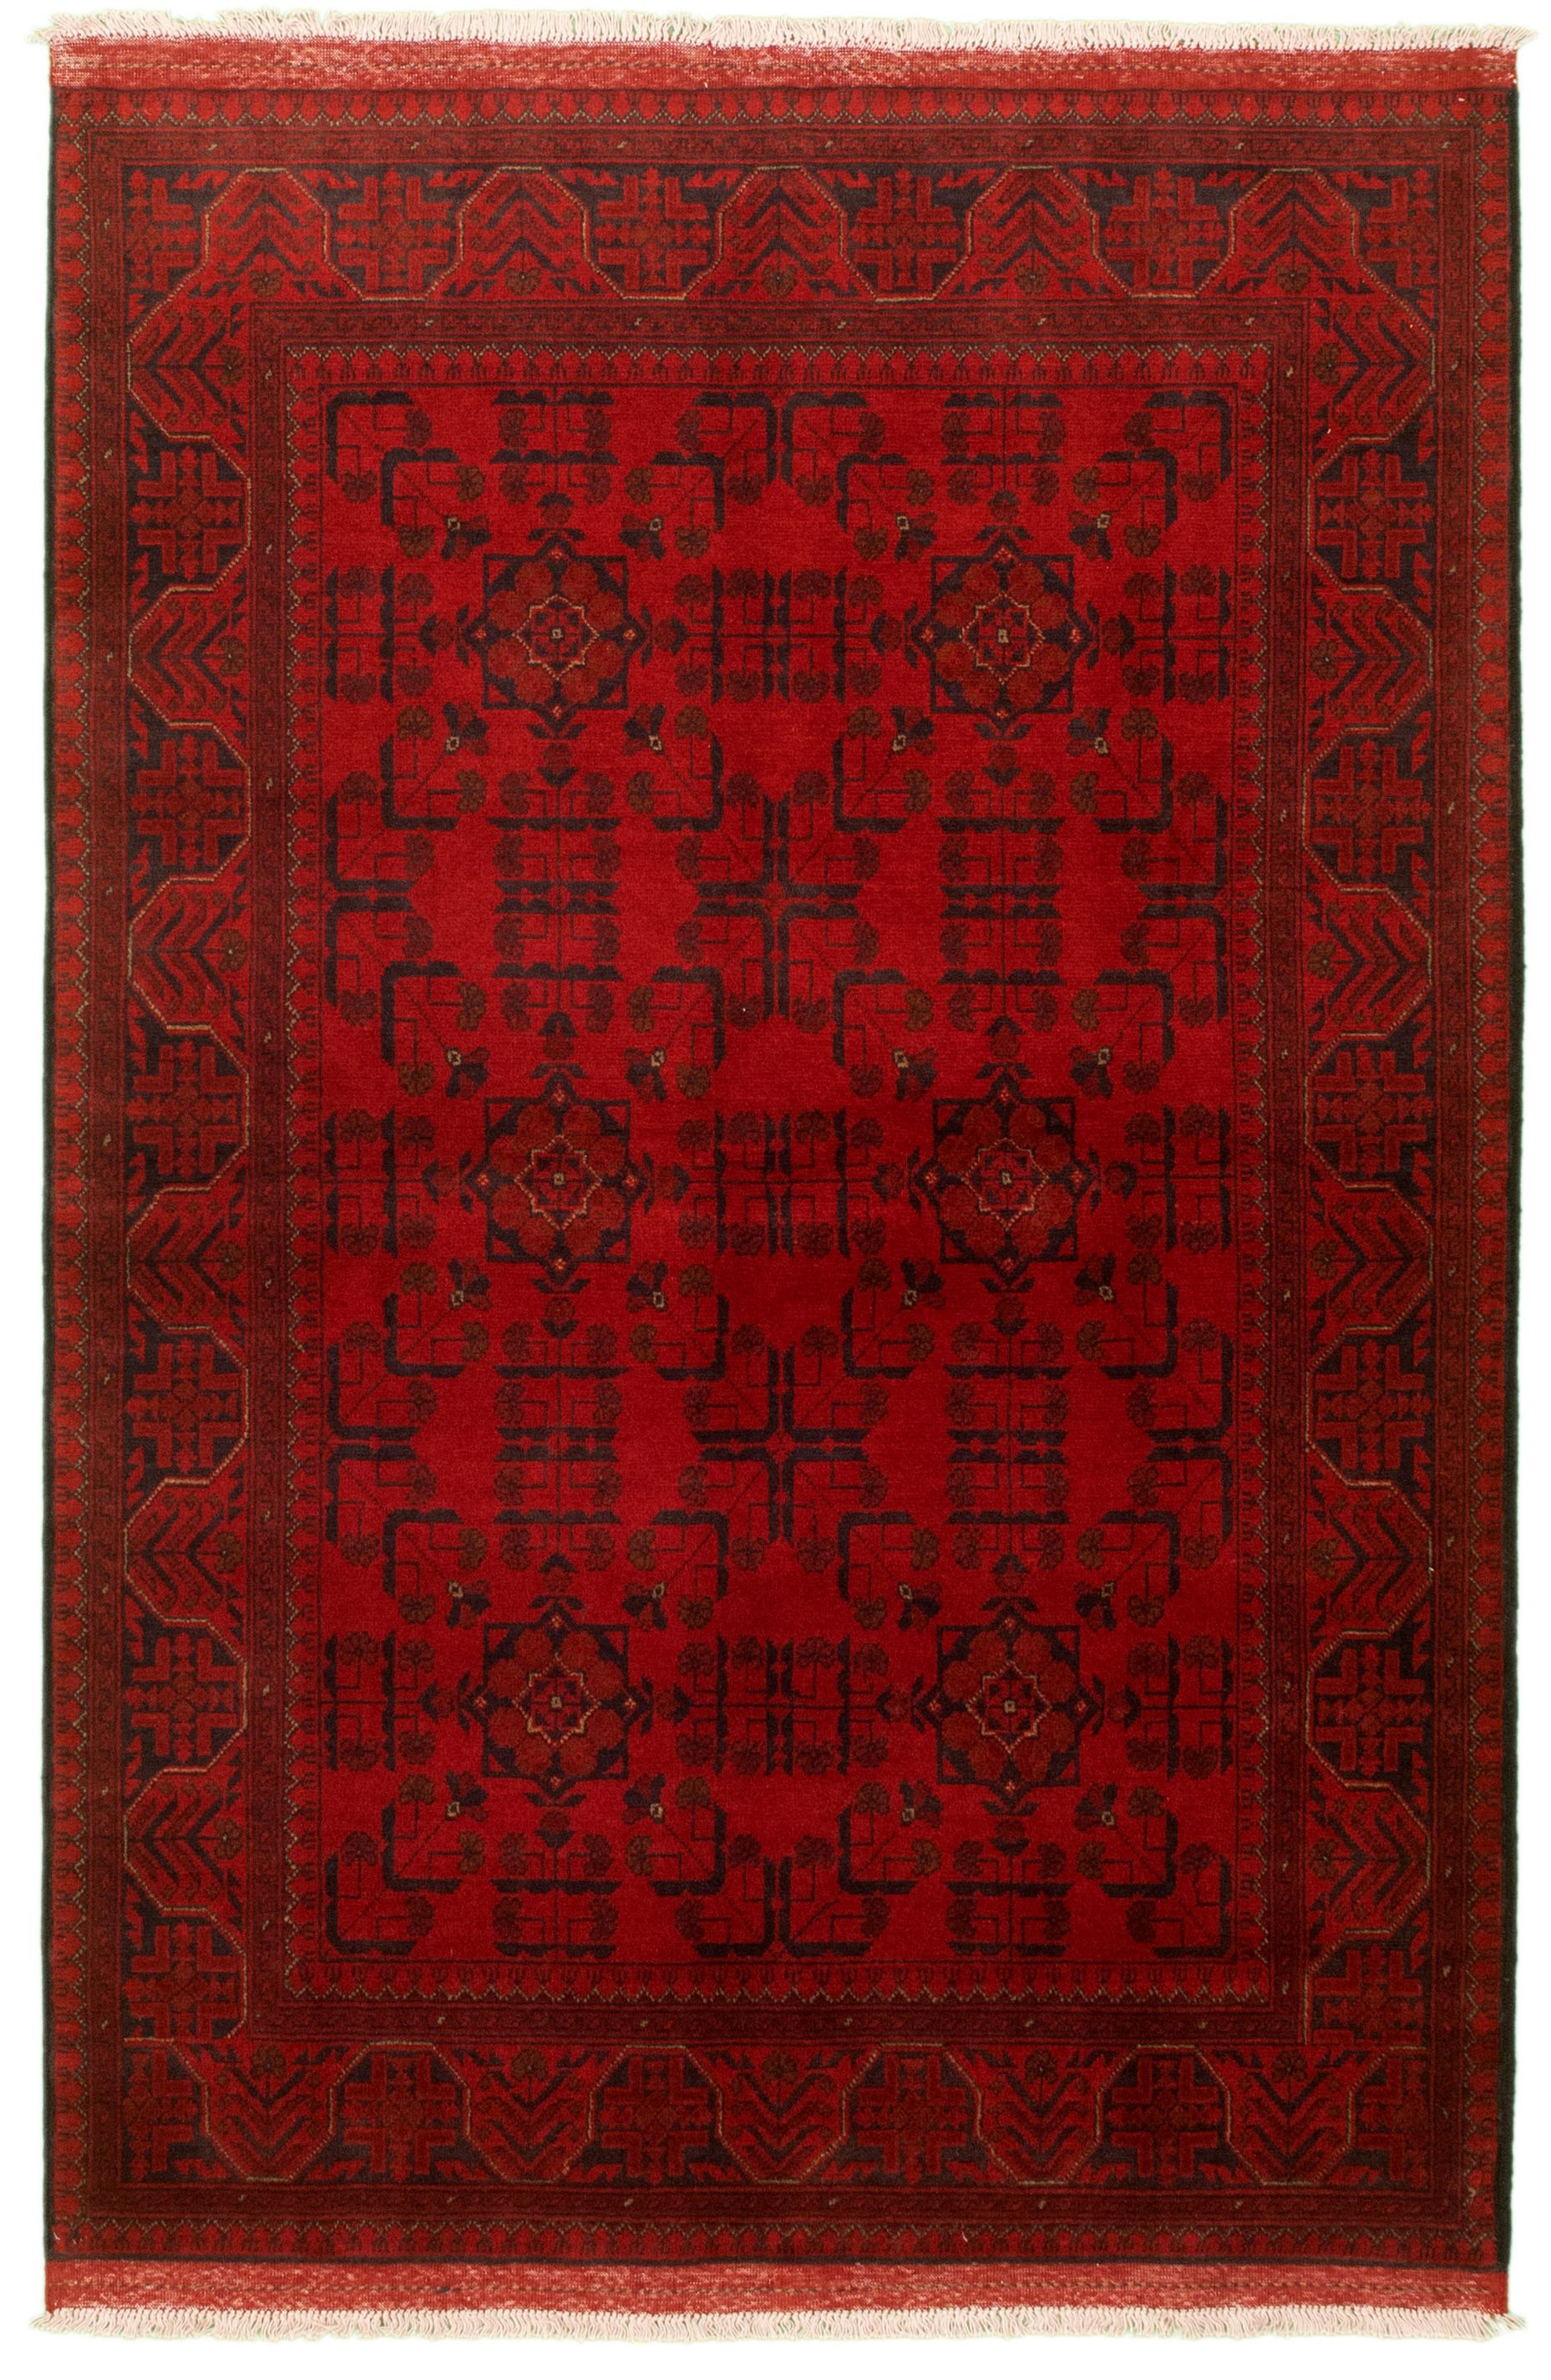 Hand-knotted Finest Khal Mohammadi Red Wool Rug 4'3" x 6'6"  Size: 4'3" x 6'6"  